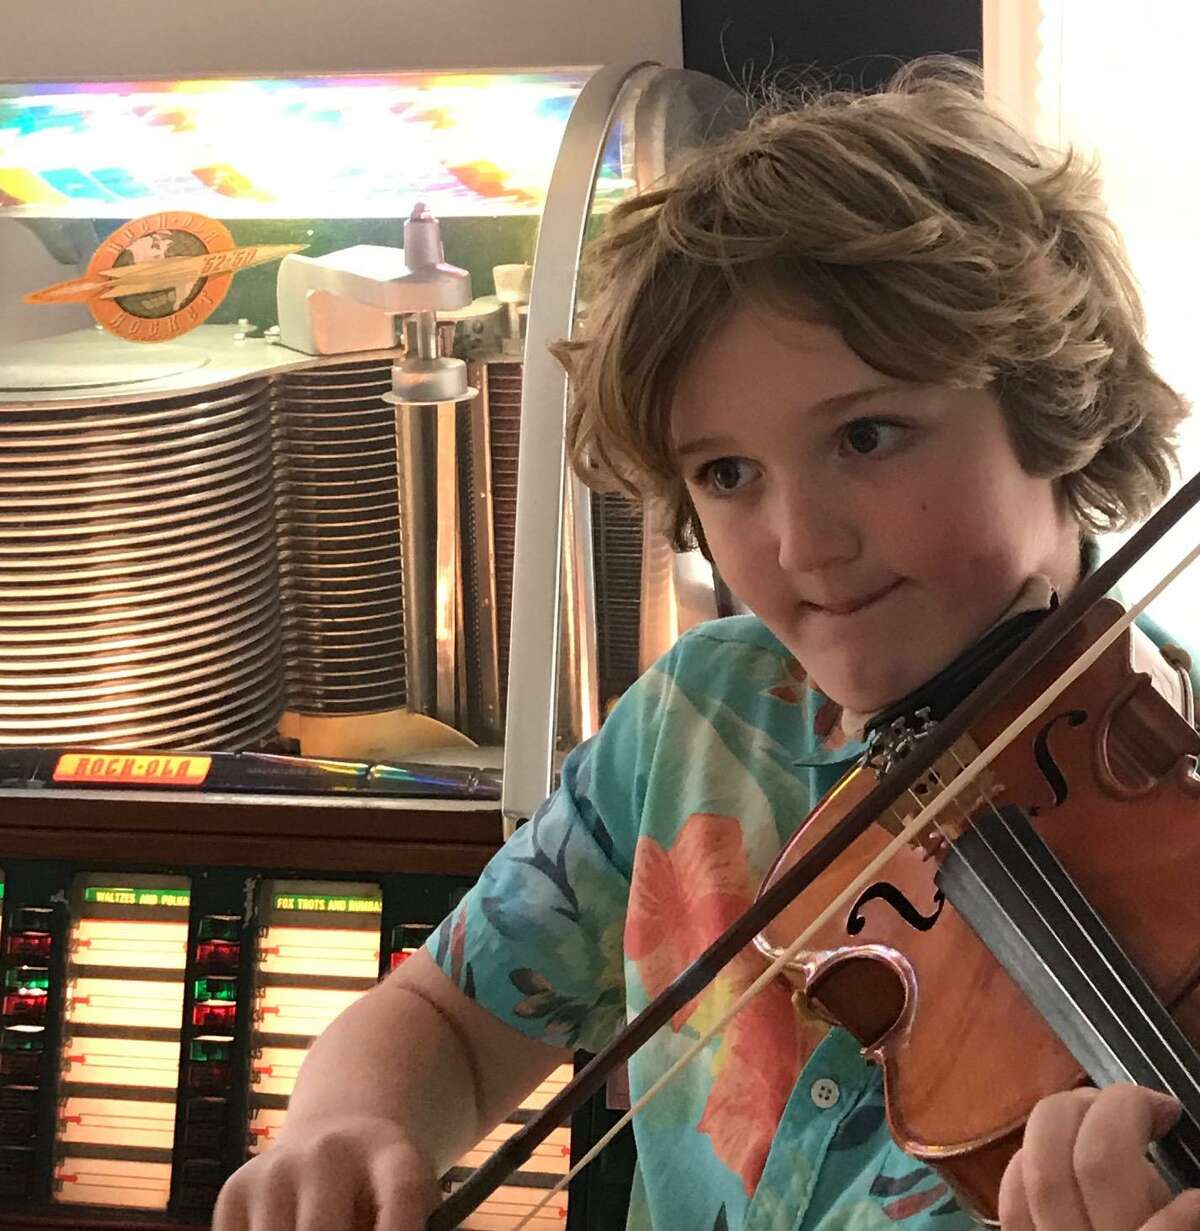 Nine-year-old Ridgefielder Austin Wakin is traveling to people's homes to play Happy Birthday, outside, on his violin.